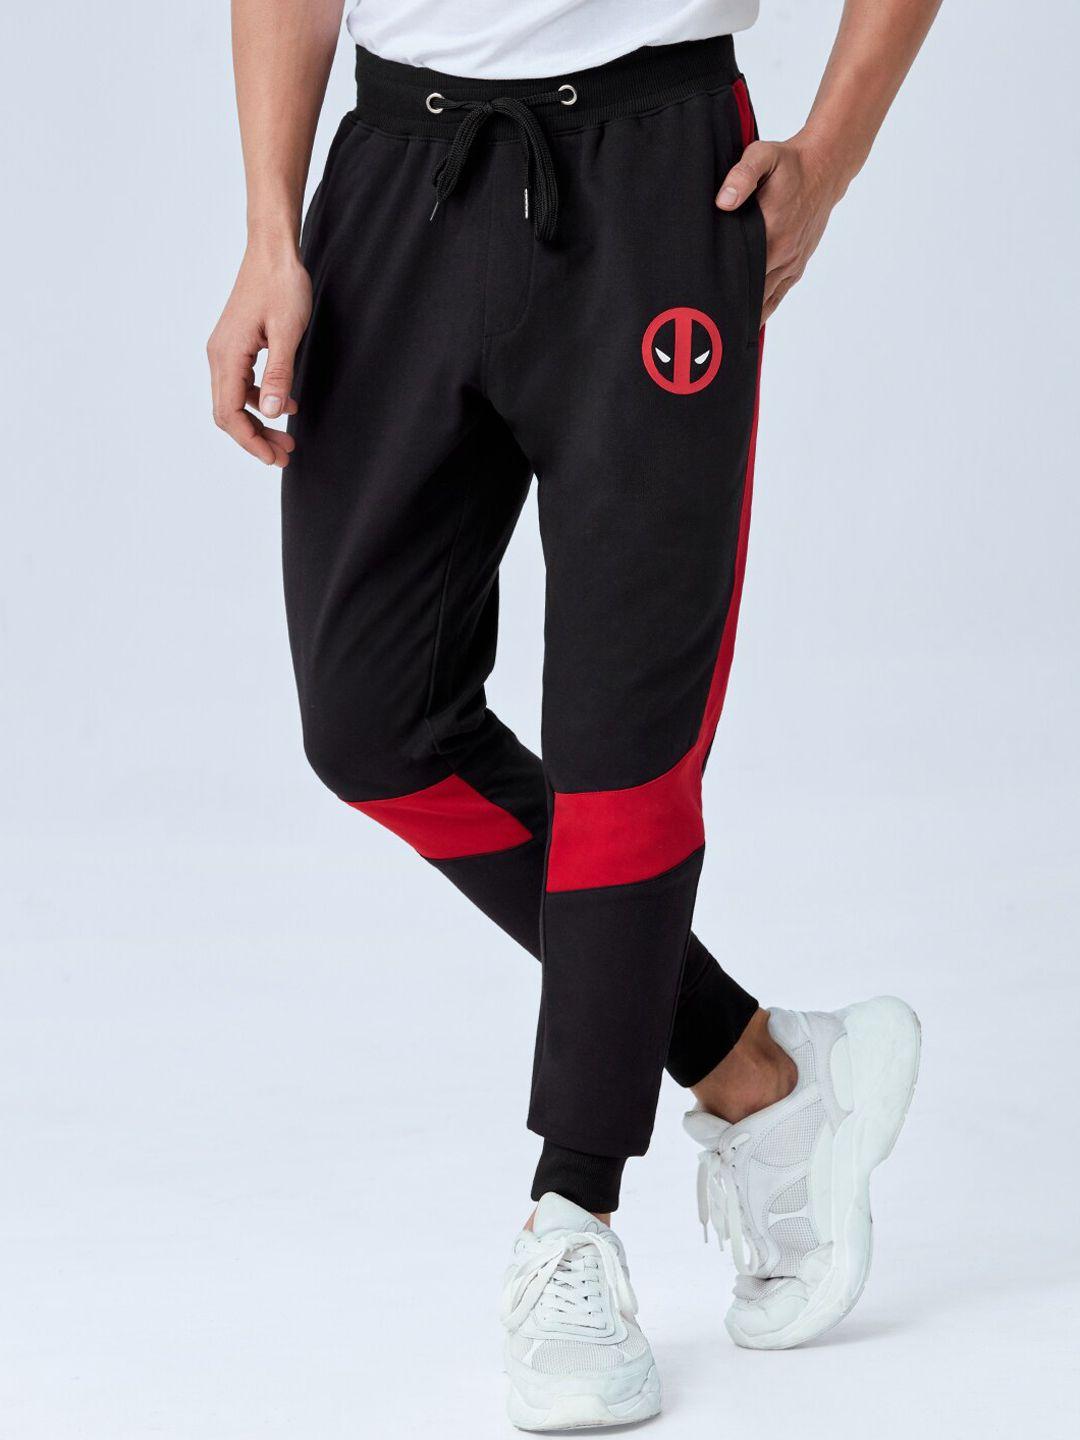 the souled store men black & red colourblocked deadpool mask printed joggers